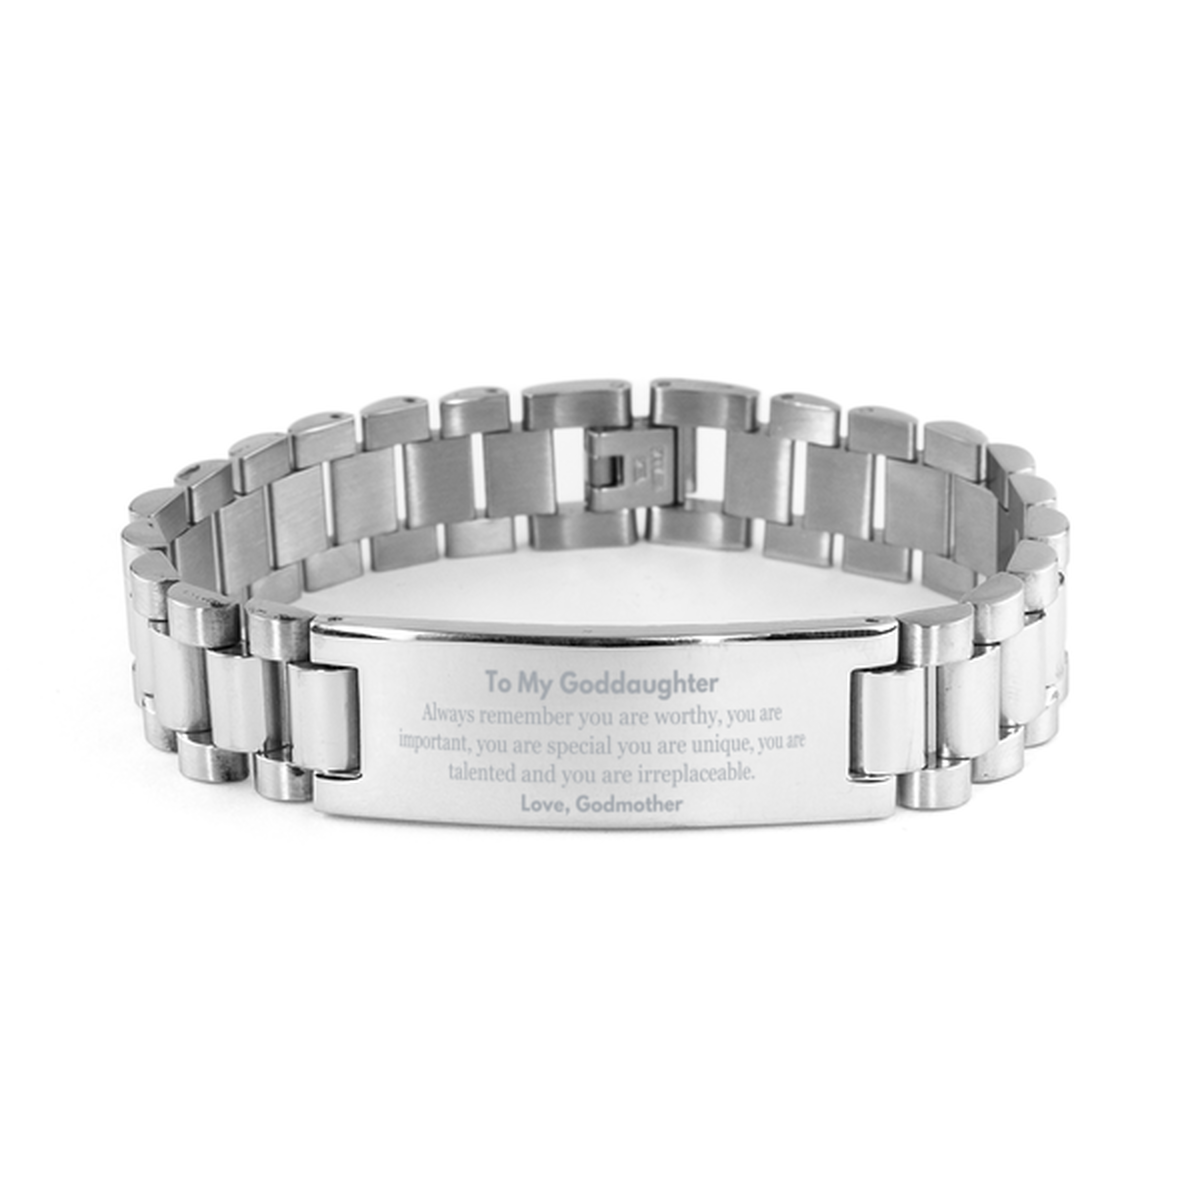 Goddaughter Birthday Gifts from Godmother, Inspirational Ladder Stainless Steel Bracelet for Goddaughter Christmas Graduation Gifts for Goddaughter Always remember you are worthy, you are important. Love, Godmother